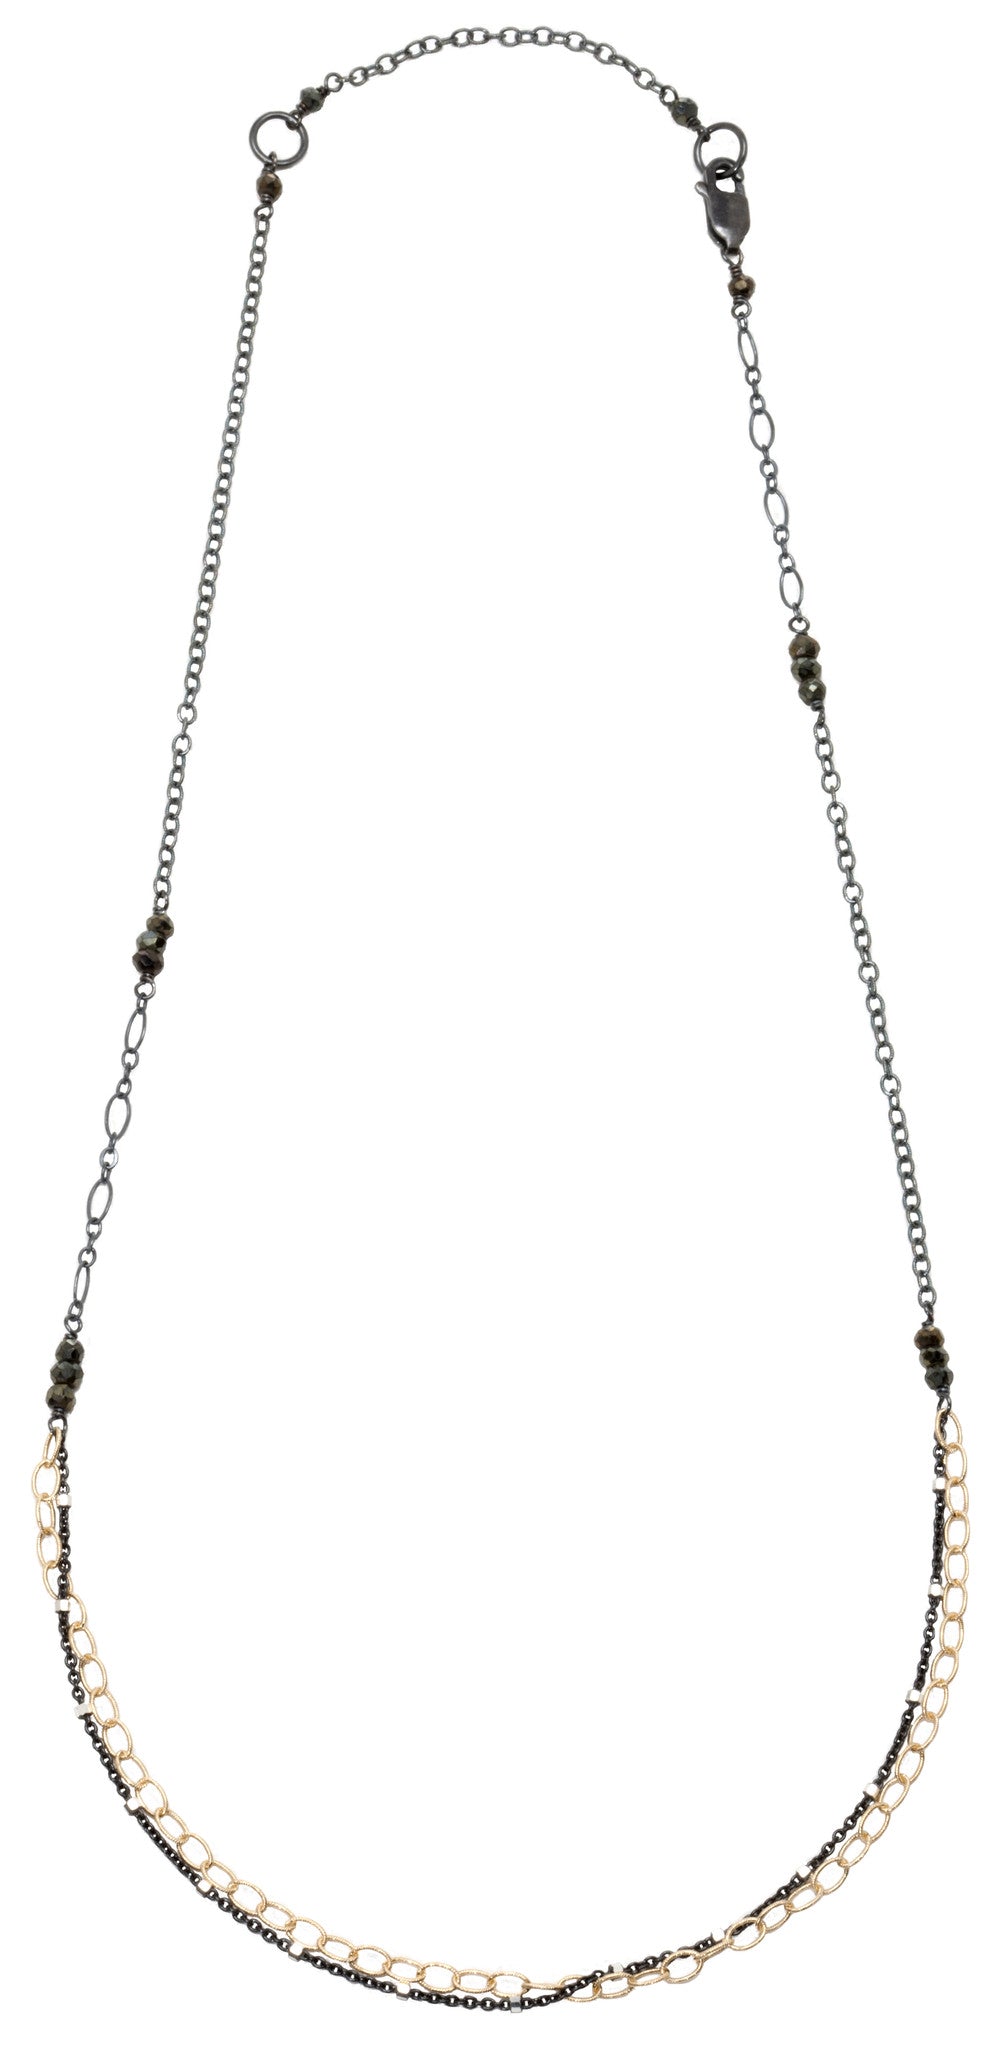 layering chain necklace - oxidized silver and gold filled